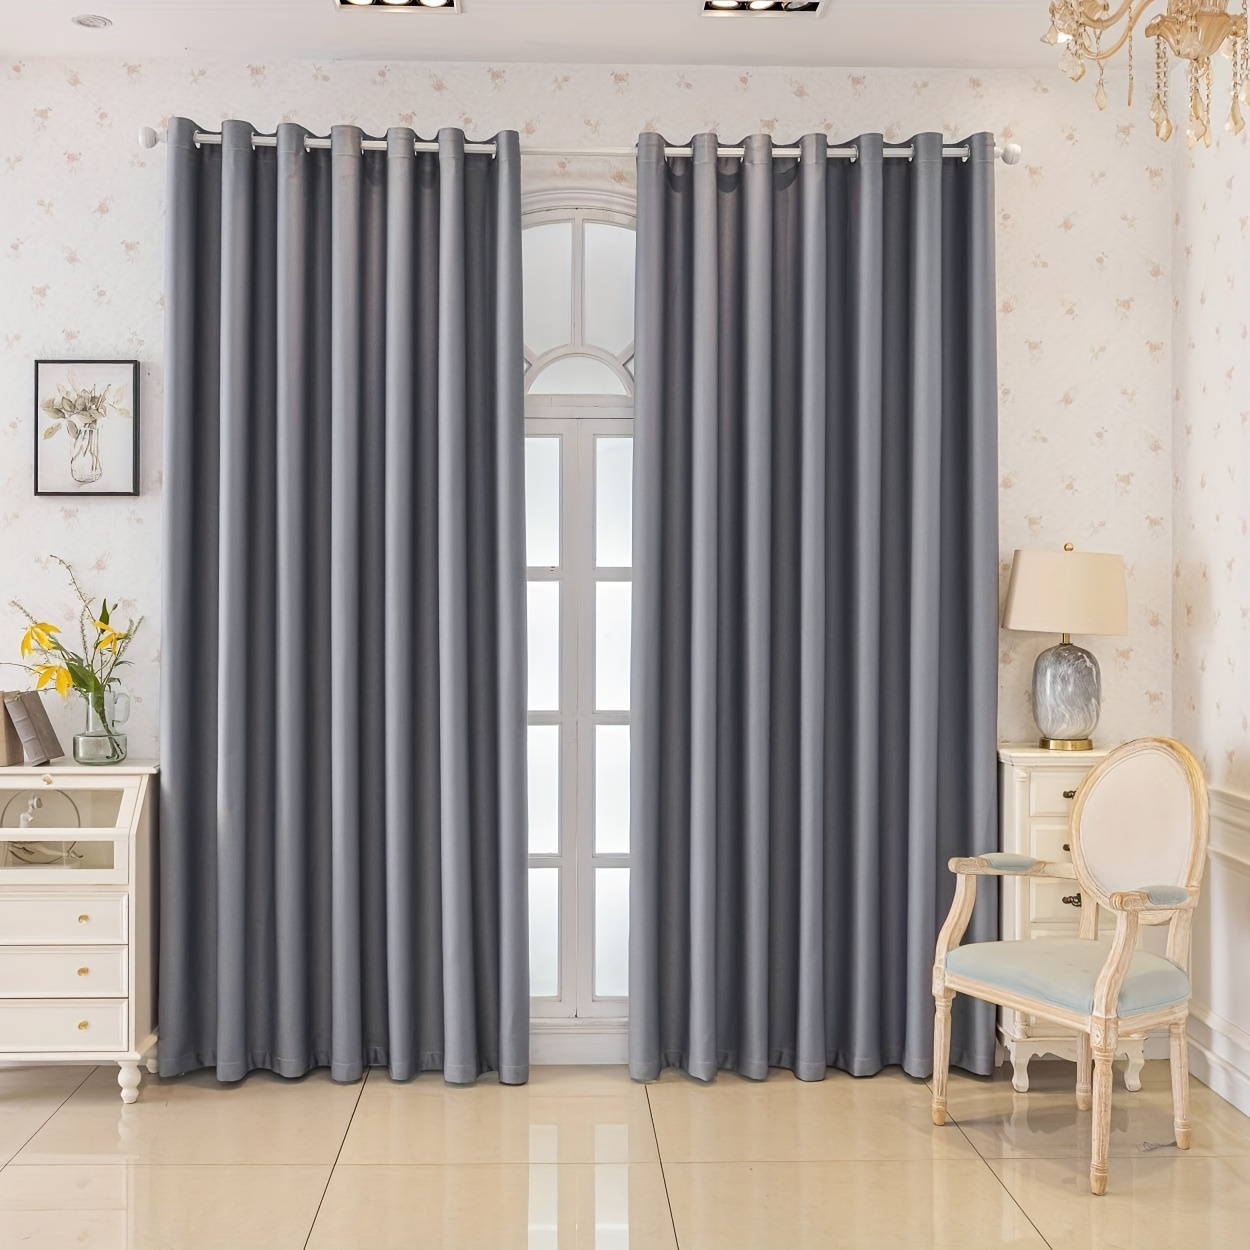 

2pcs Set Thickened Blackout Curtains - Classic Solid Color, Heat Insulating, Machine Washable For Living Room, Balcony, Dining & Study Curtains For Living Room Curtains For Windows